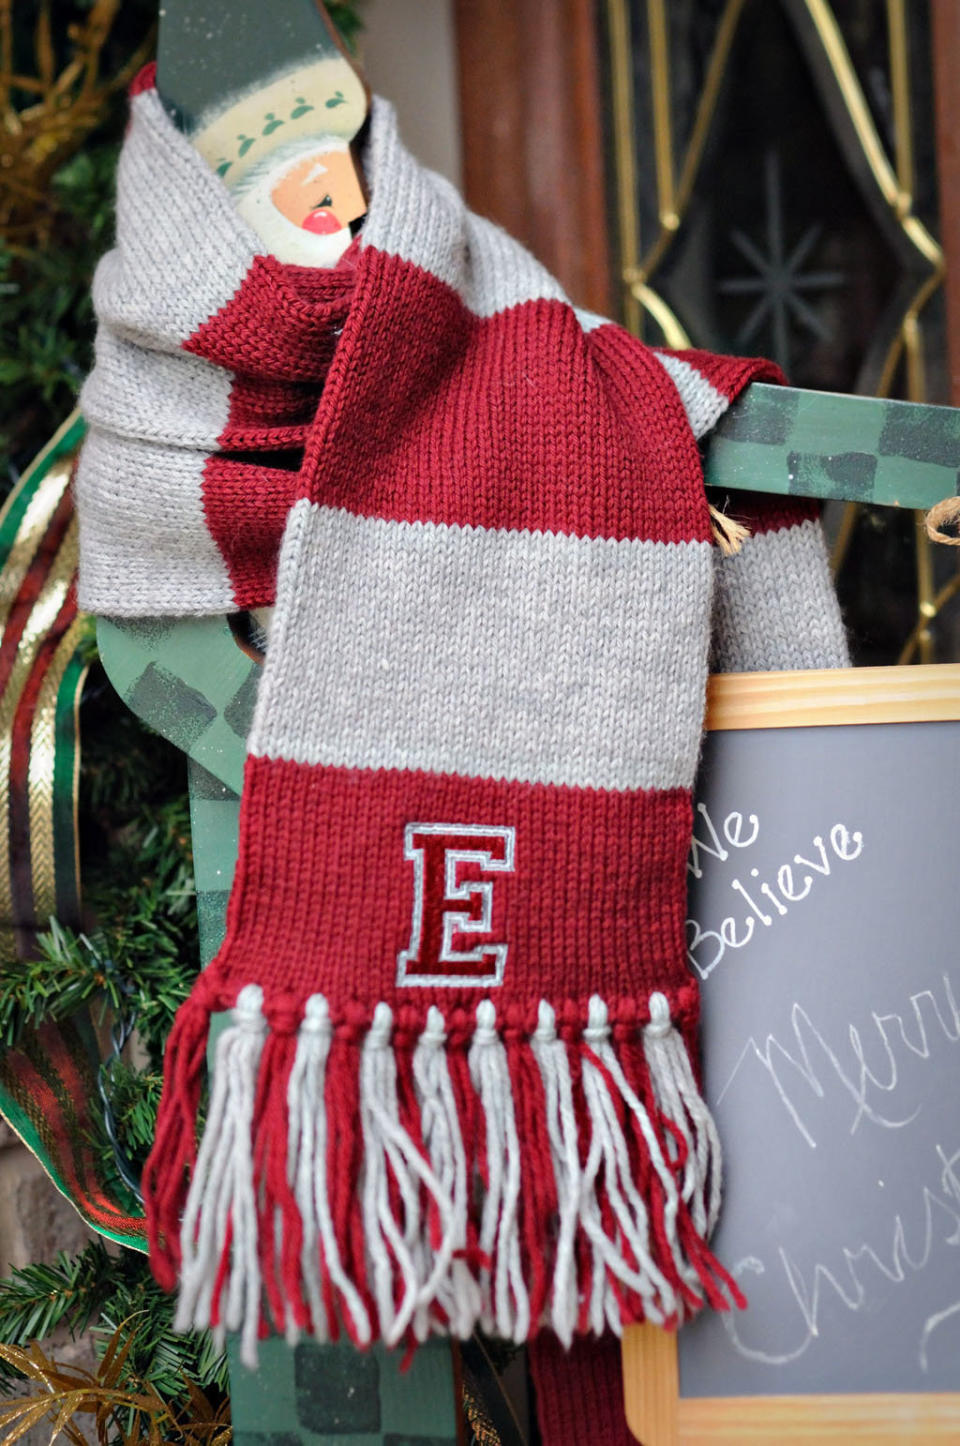 Forget the college bookstore -- you won't even need to leave home to make <a href="http://www.huffingtonpost.com/2012/12/17/homemade-gift-ideas-collegiate-scarf_n_2315311.html">this spirited gift</a>.